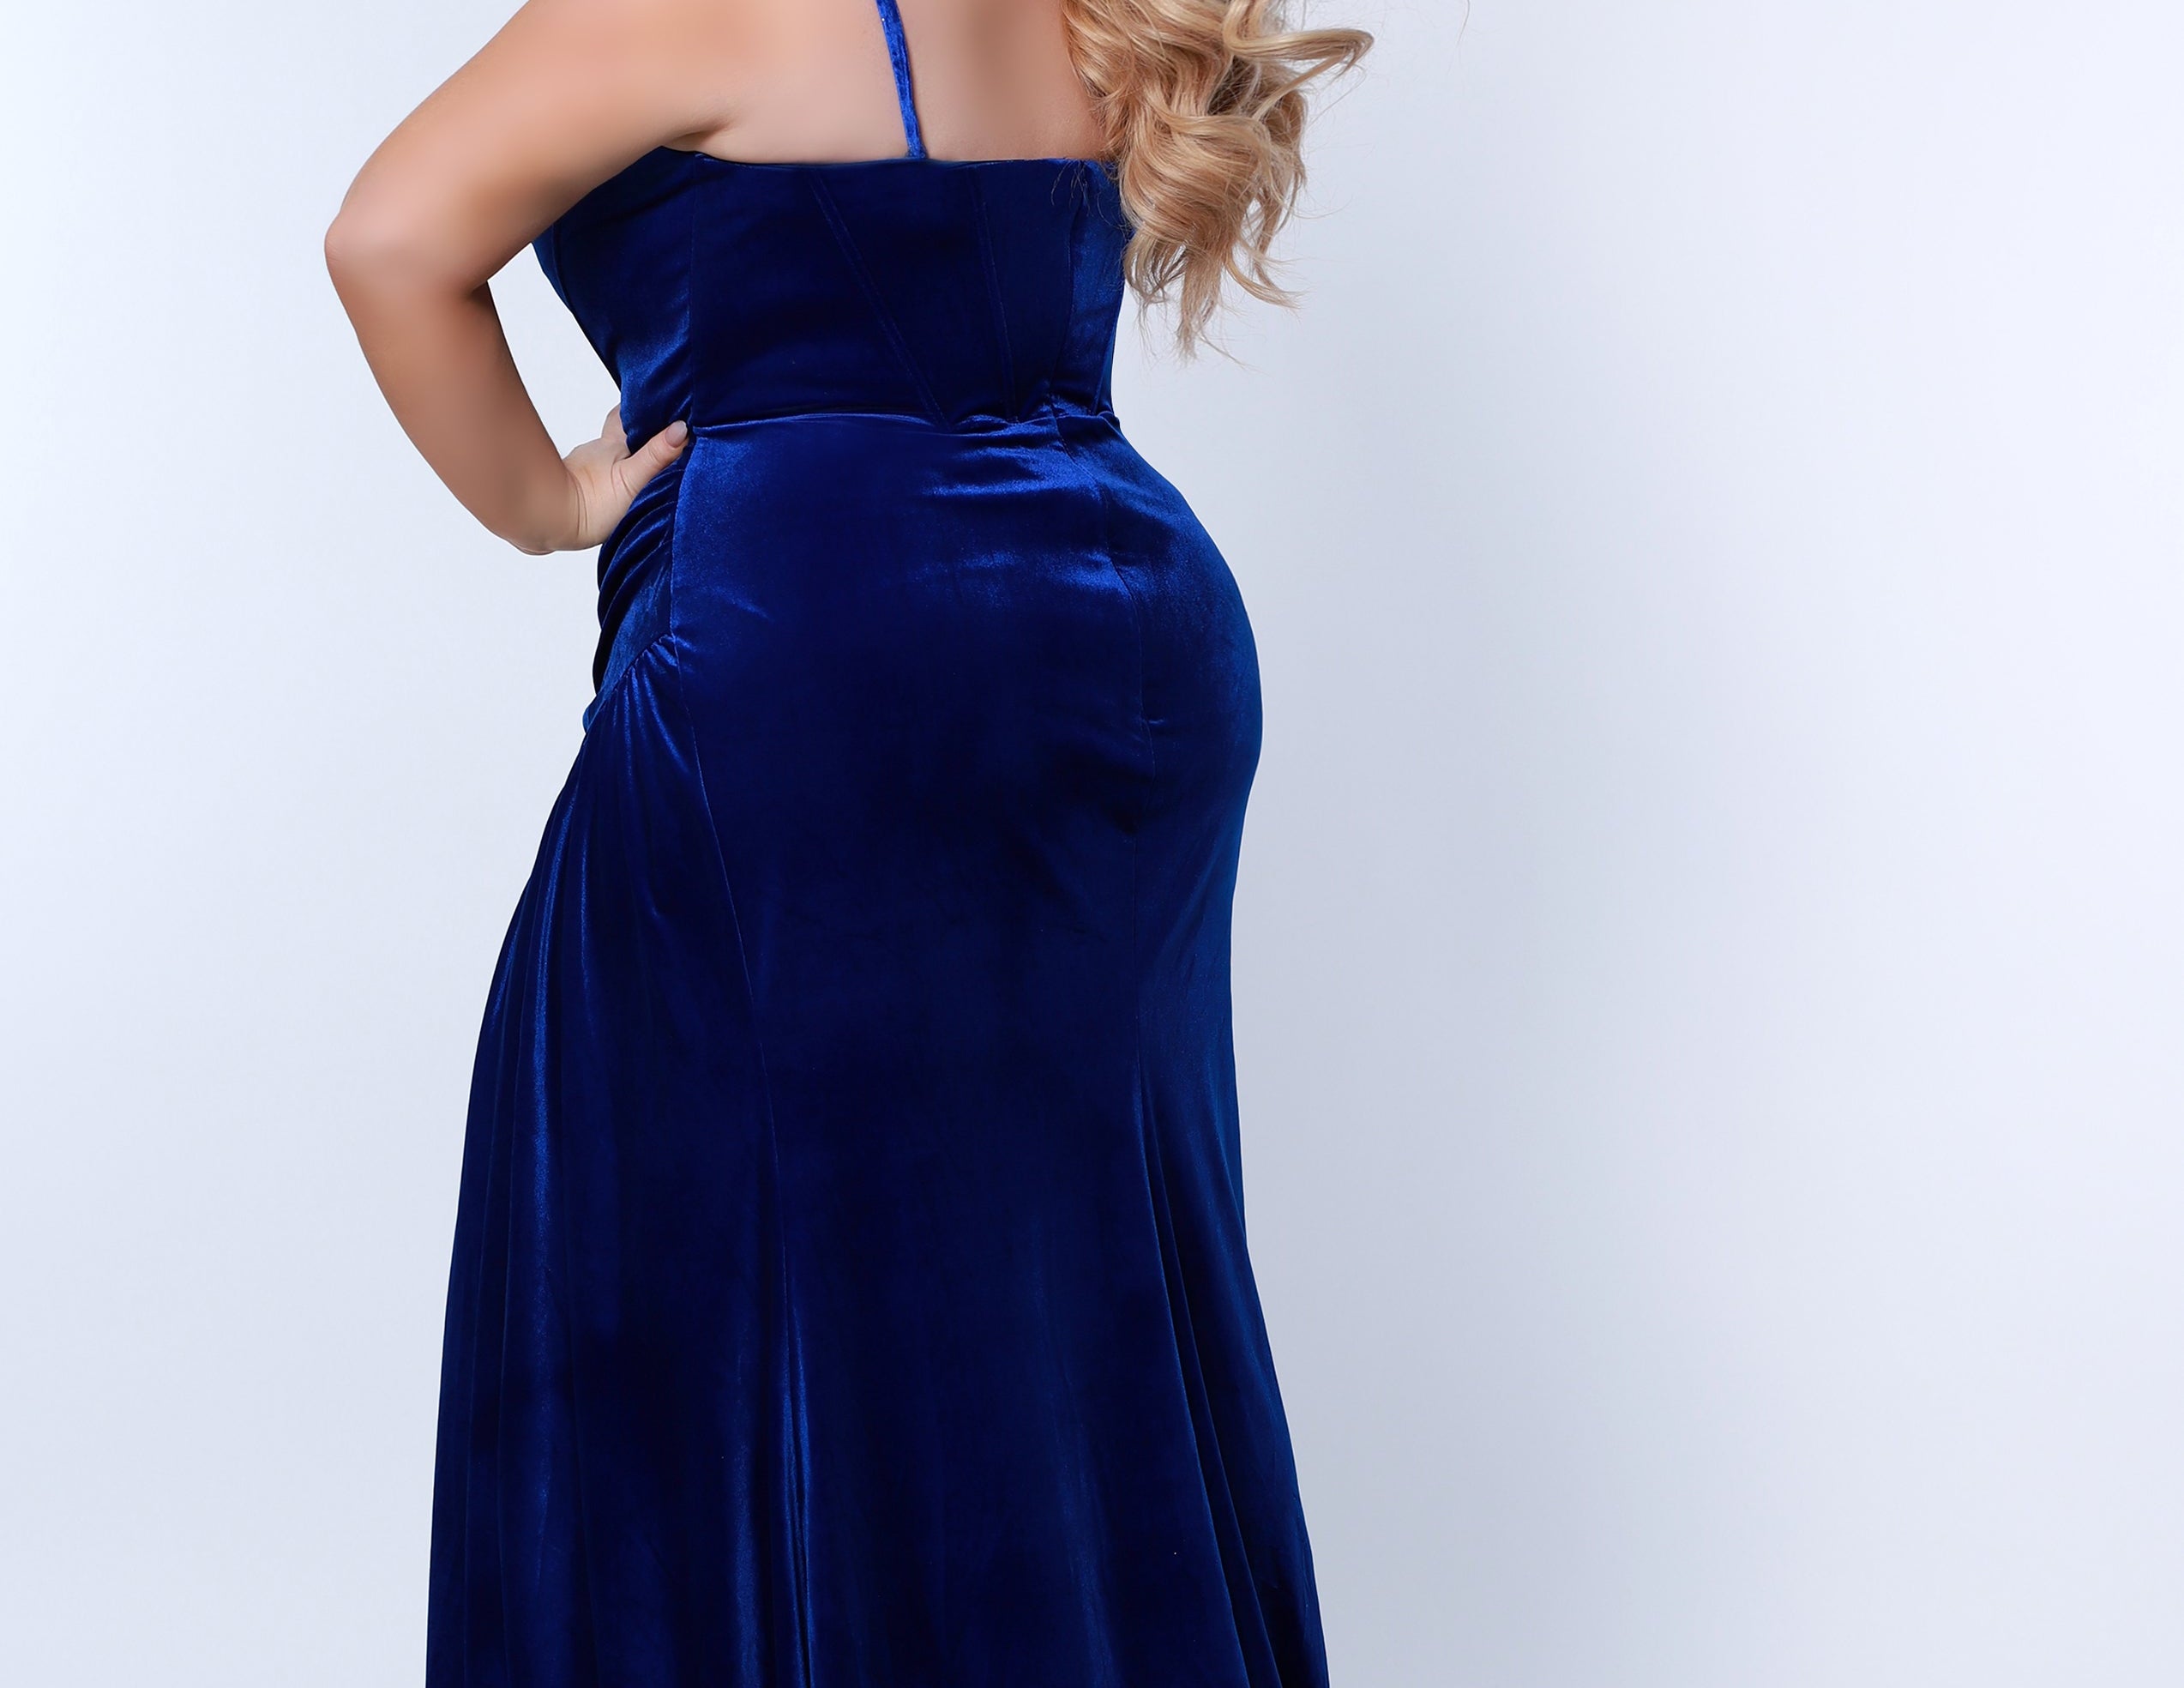 Sydney’s Closet SC7342 Royal blue. Slim/Fitted silhouette, strapless with optional spaghetti straps. Modified Basque waist, exposed corset boning on bodice and a ruched waist. Stretch velvet, with high slit and sweep train.